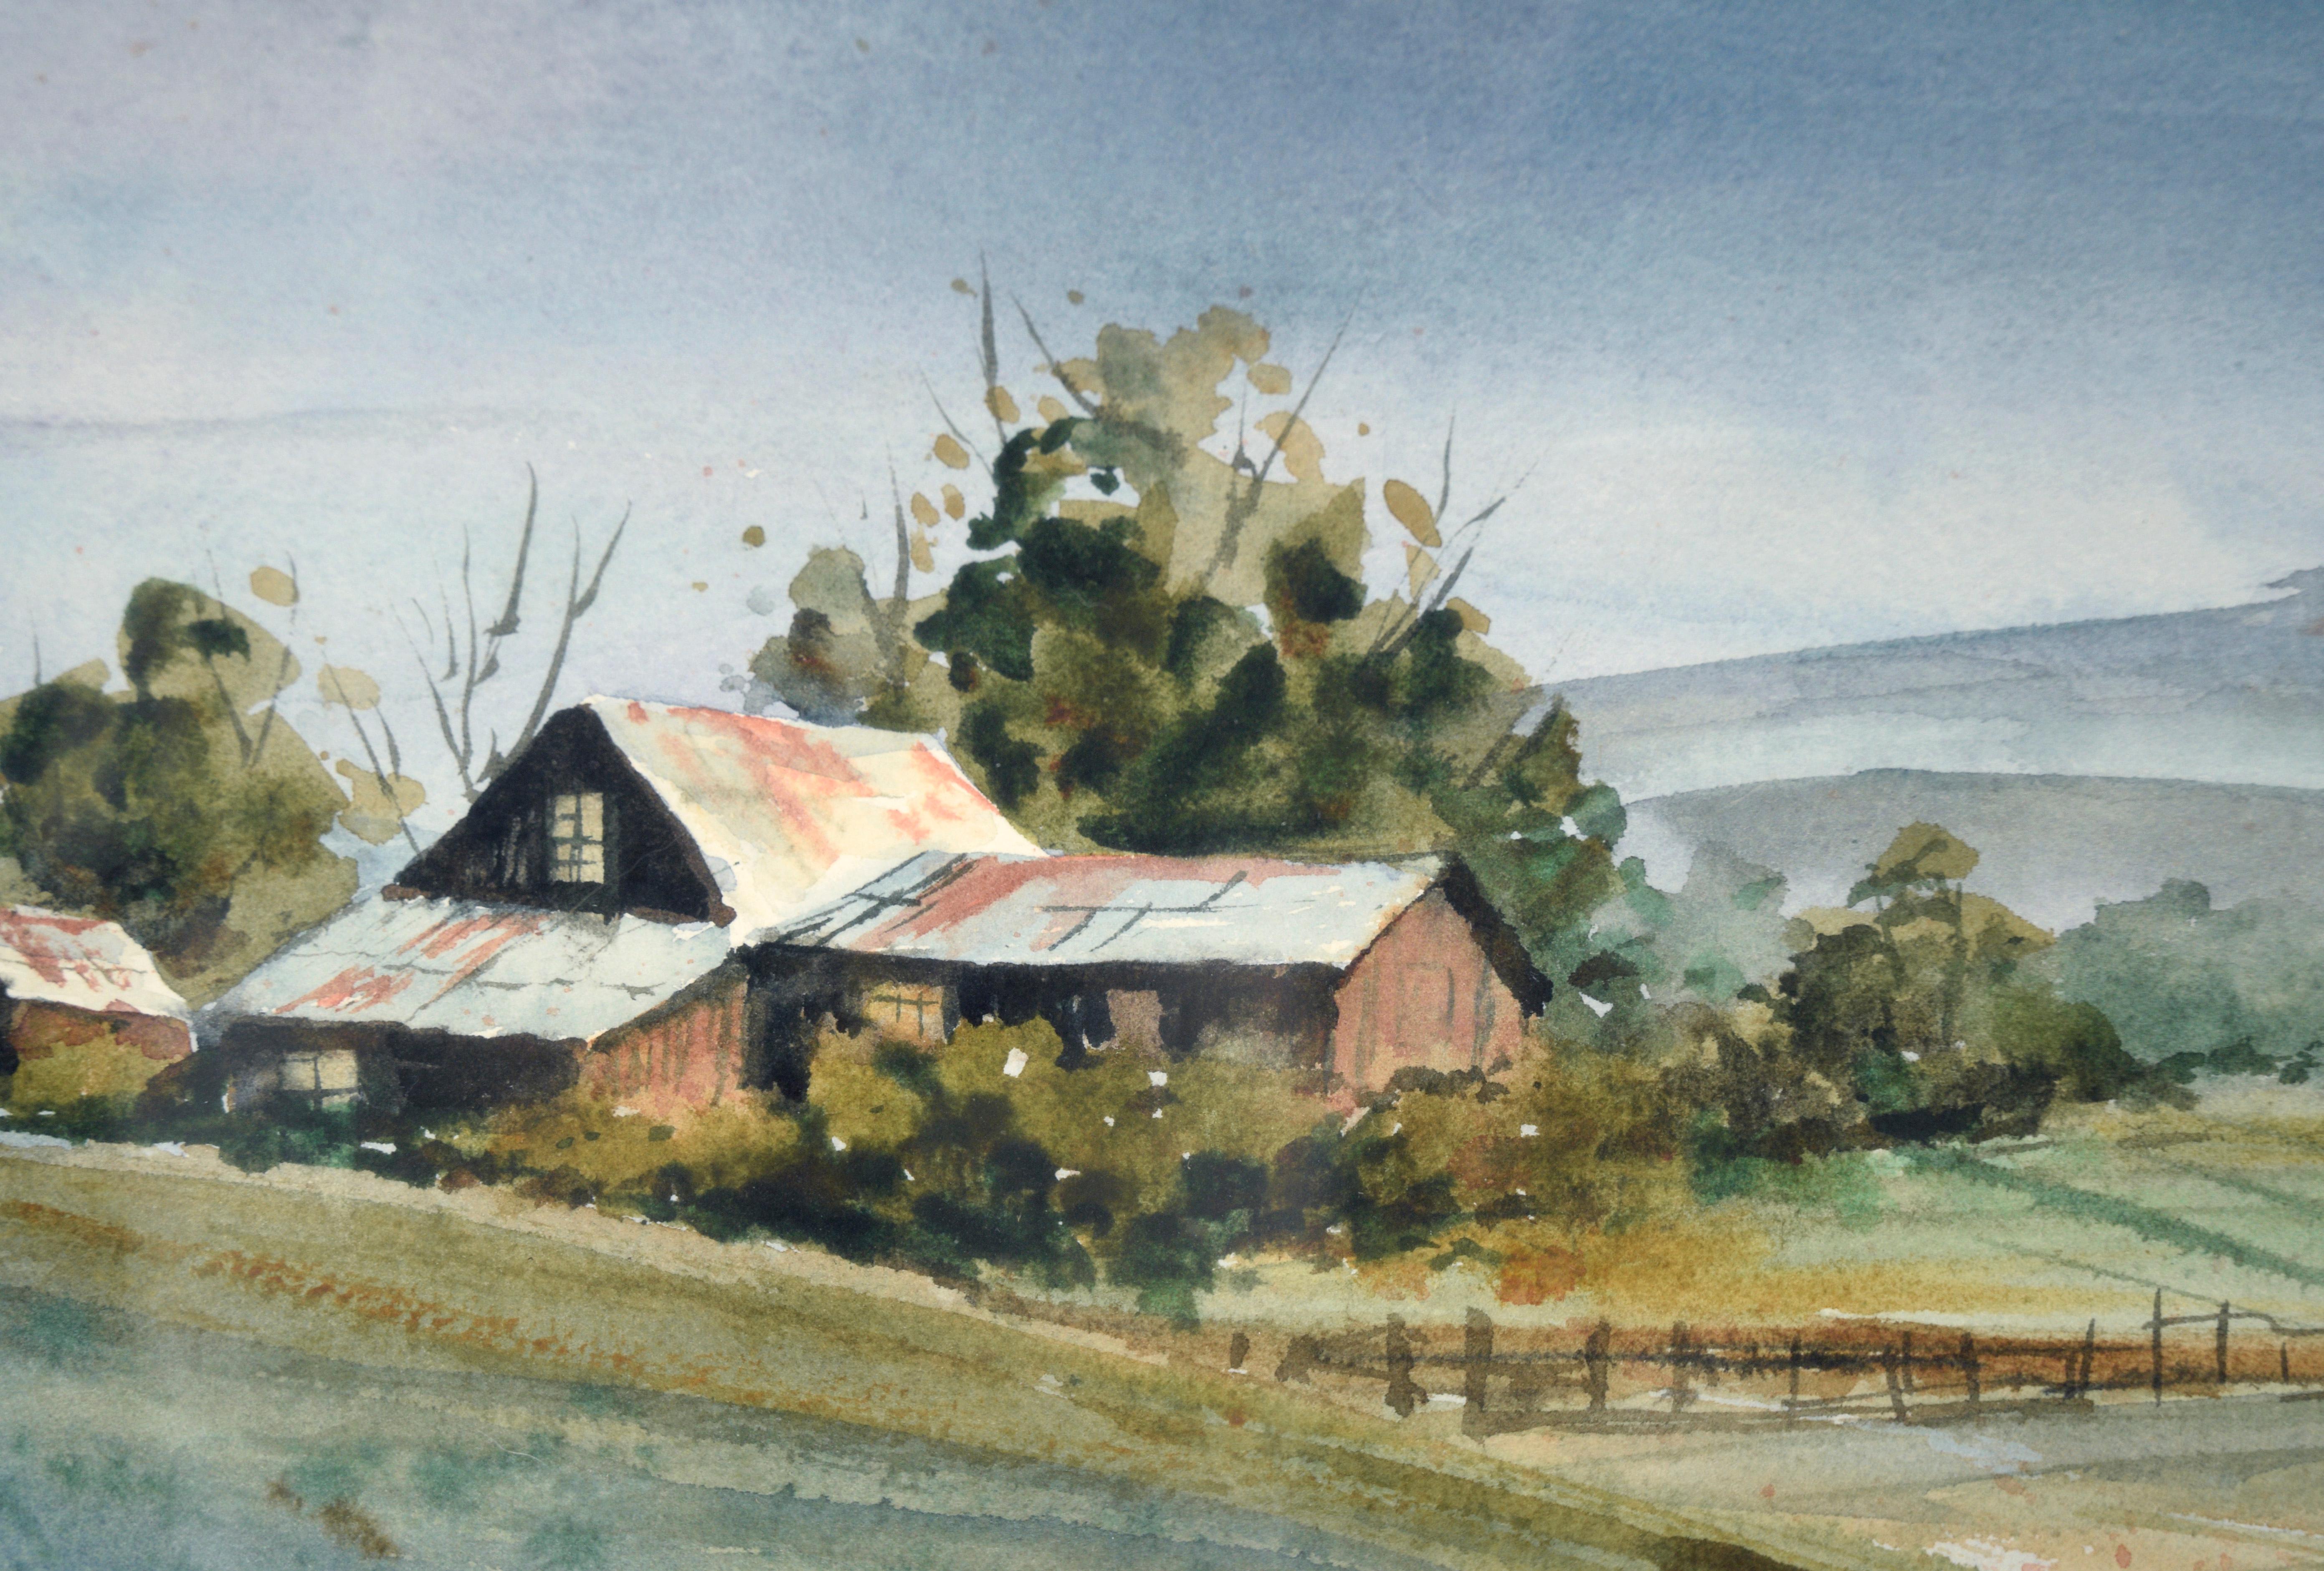 Farmhouse in the Foothills - Rural California Landscape in Watercolor on Paper

Idyllic country landscape by California artist Alice Duke (American, 1921-2012). Amador County California. A rustic farmhouse sits at the bottom of a sloping hill at